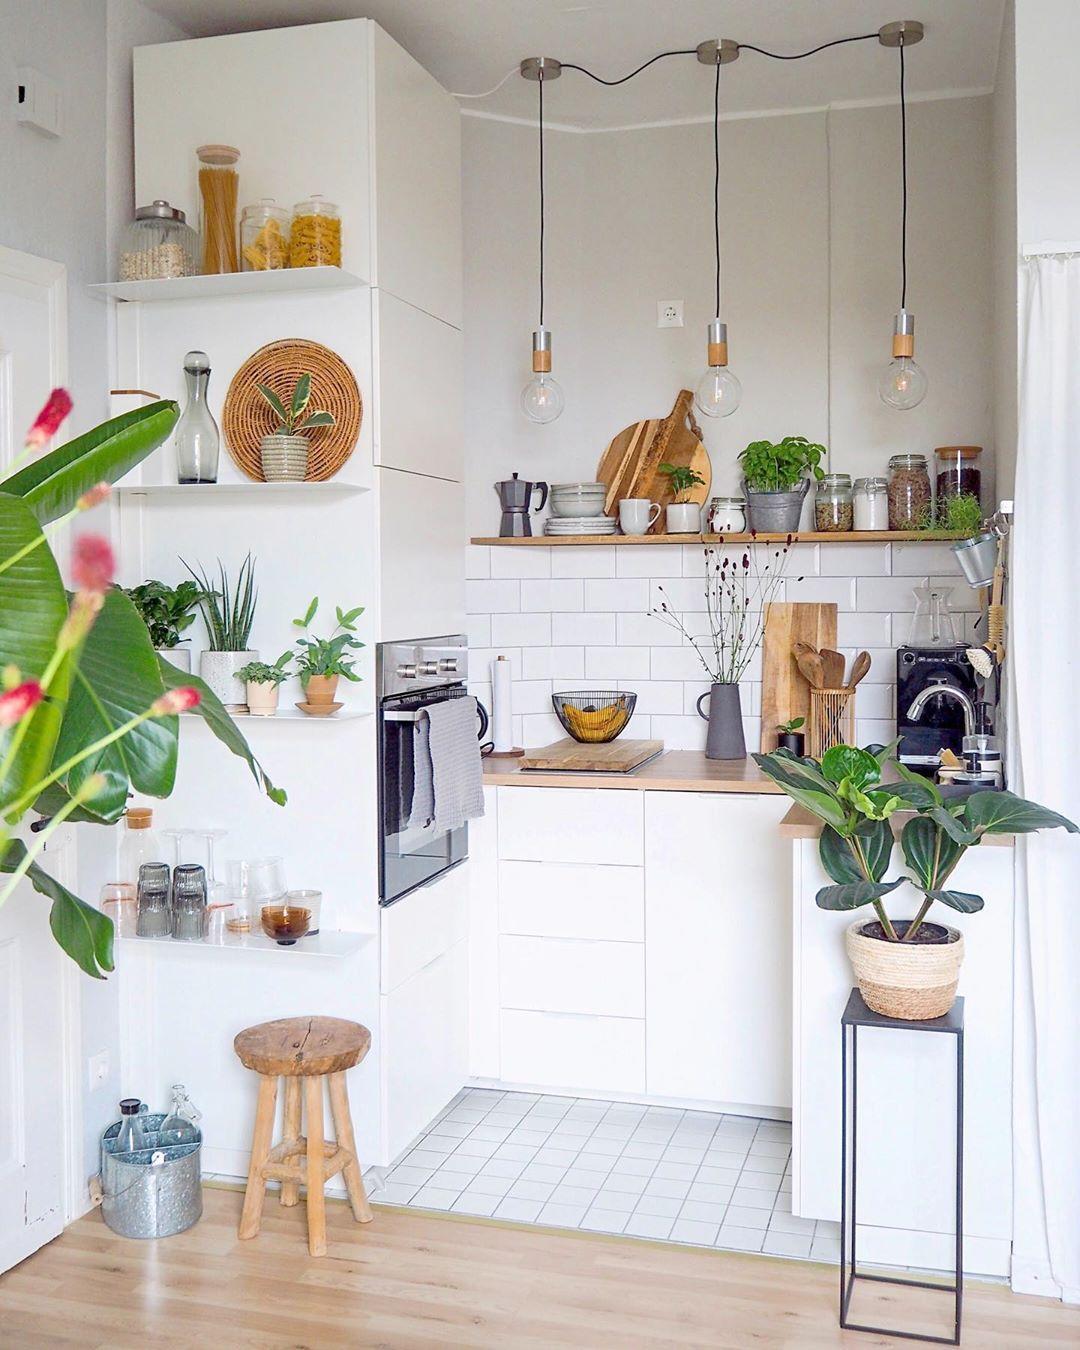 3 Ways to Brighten Up Small Spaces with Natural Elements